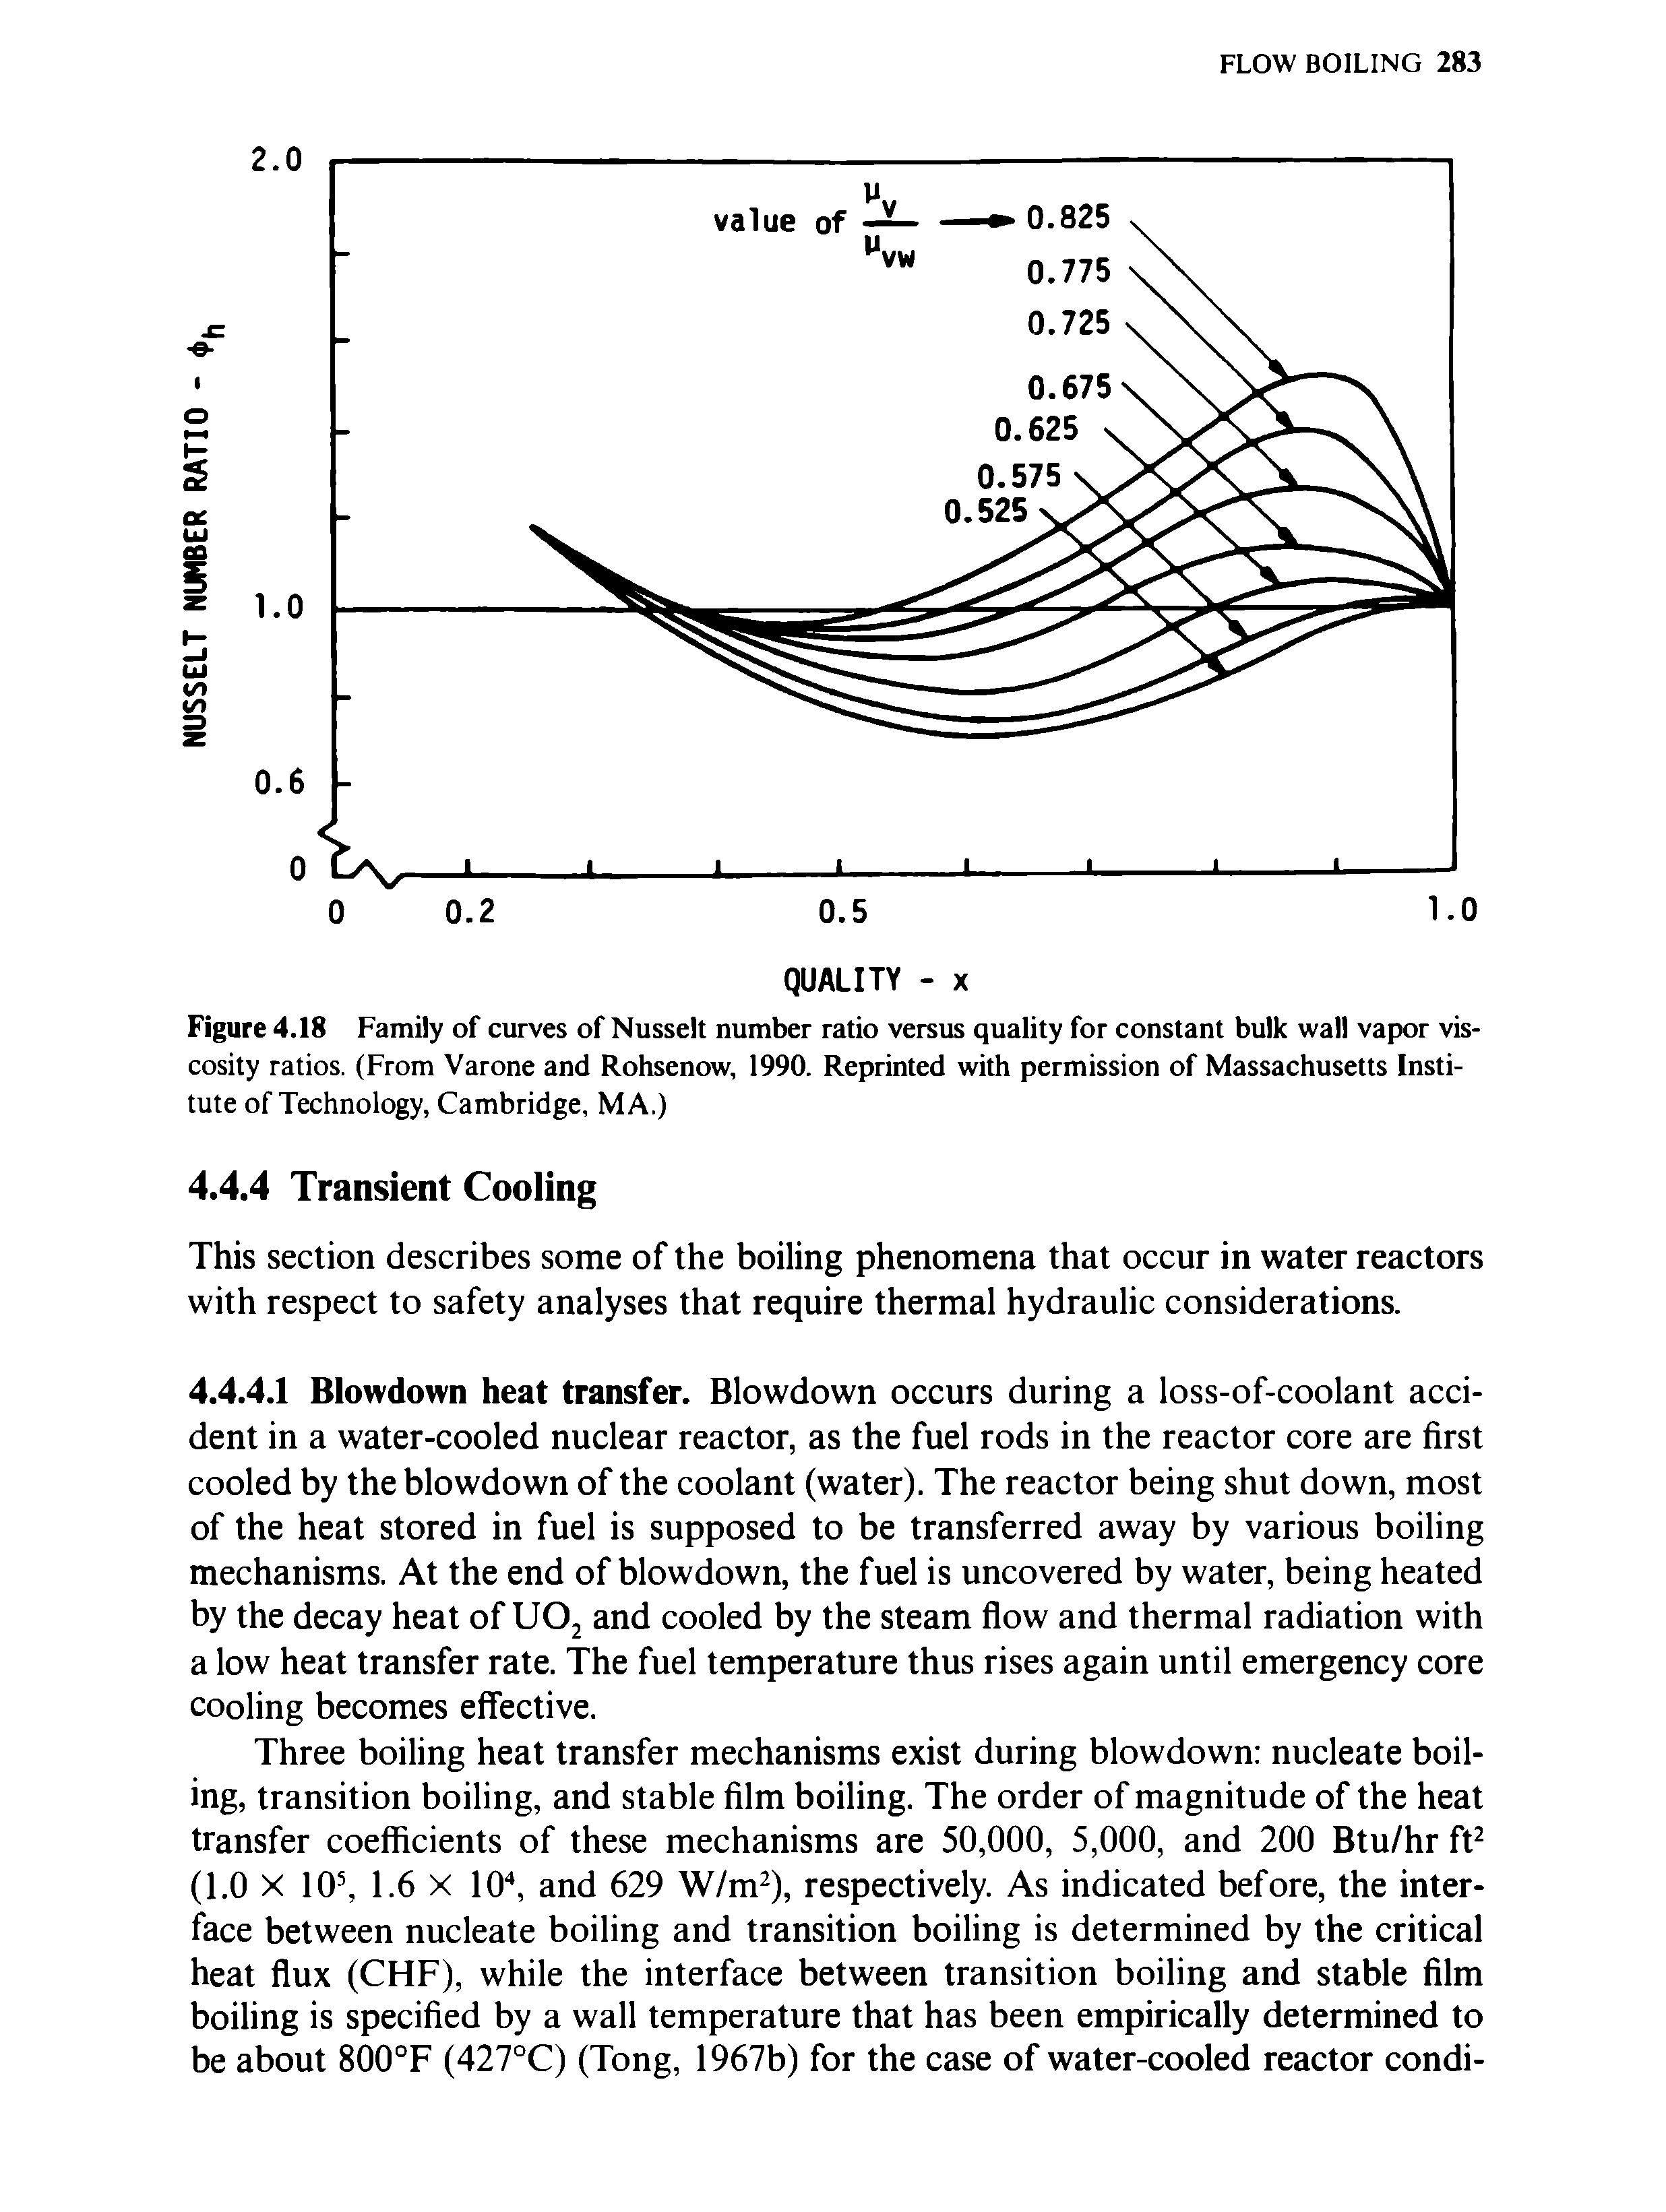 Figure 4.18 Family of curves of Nusselt number ratio versus quality for constant bulk wall vapor viscosity ratios. (From Varone and Rohsenow, 1990. Reprinted with permission of Massachusetts Institute of Technology, Cambridge, MA.)...